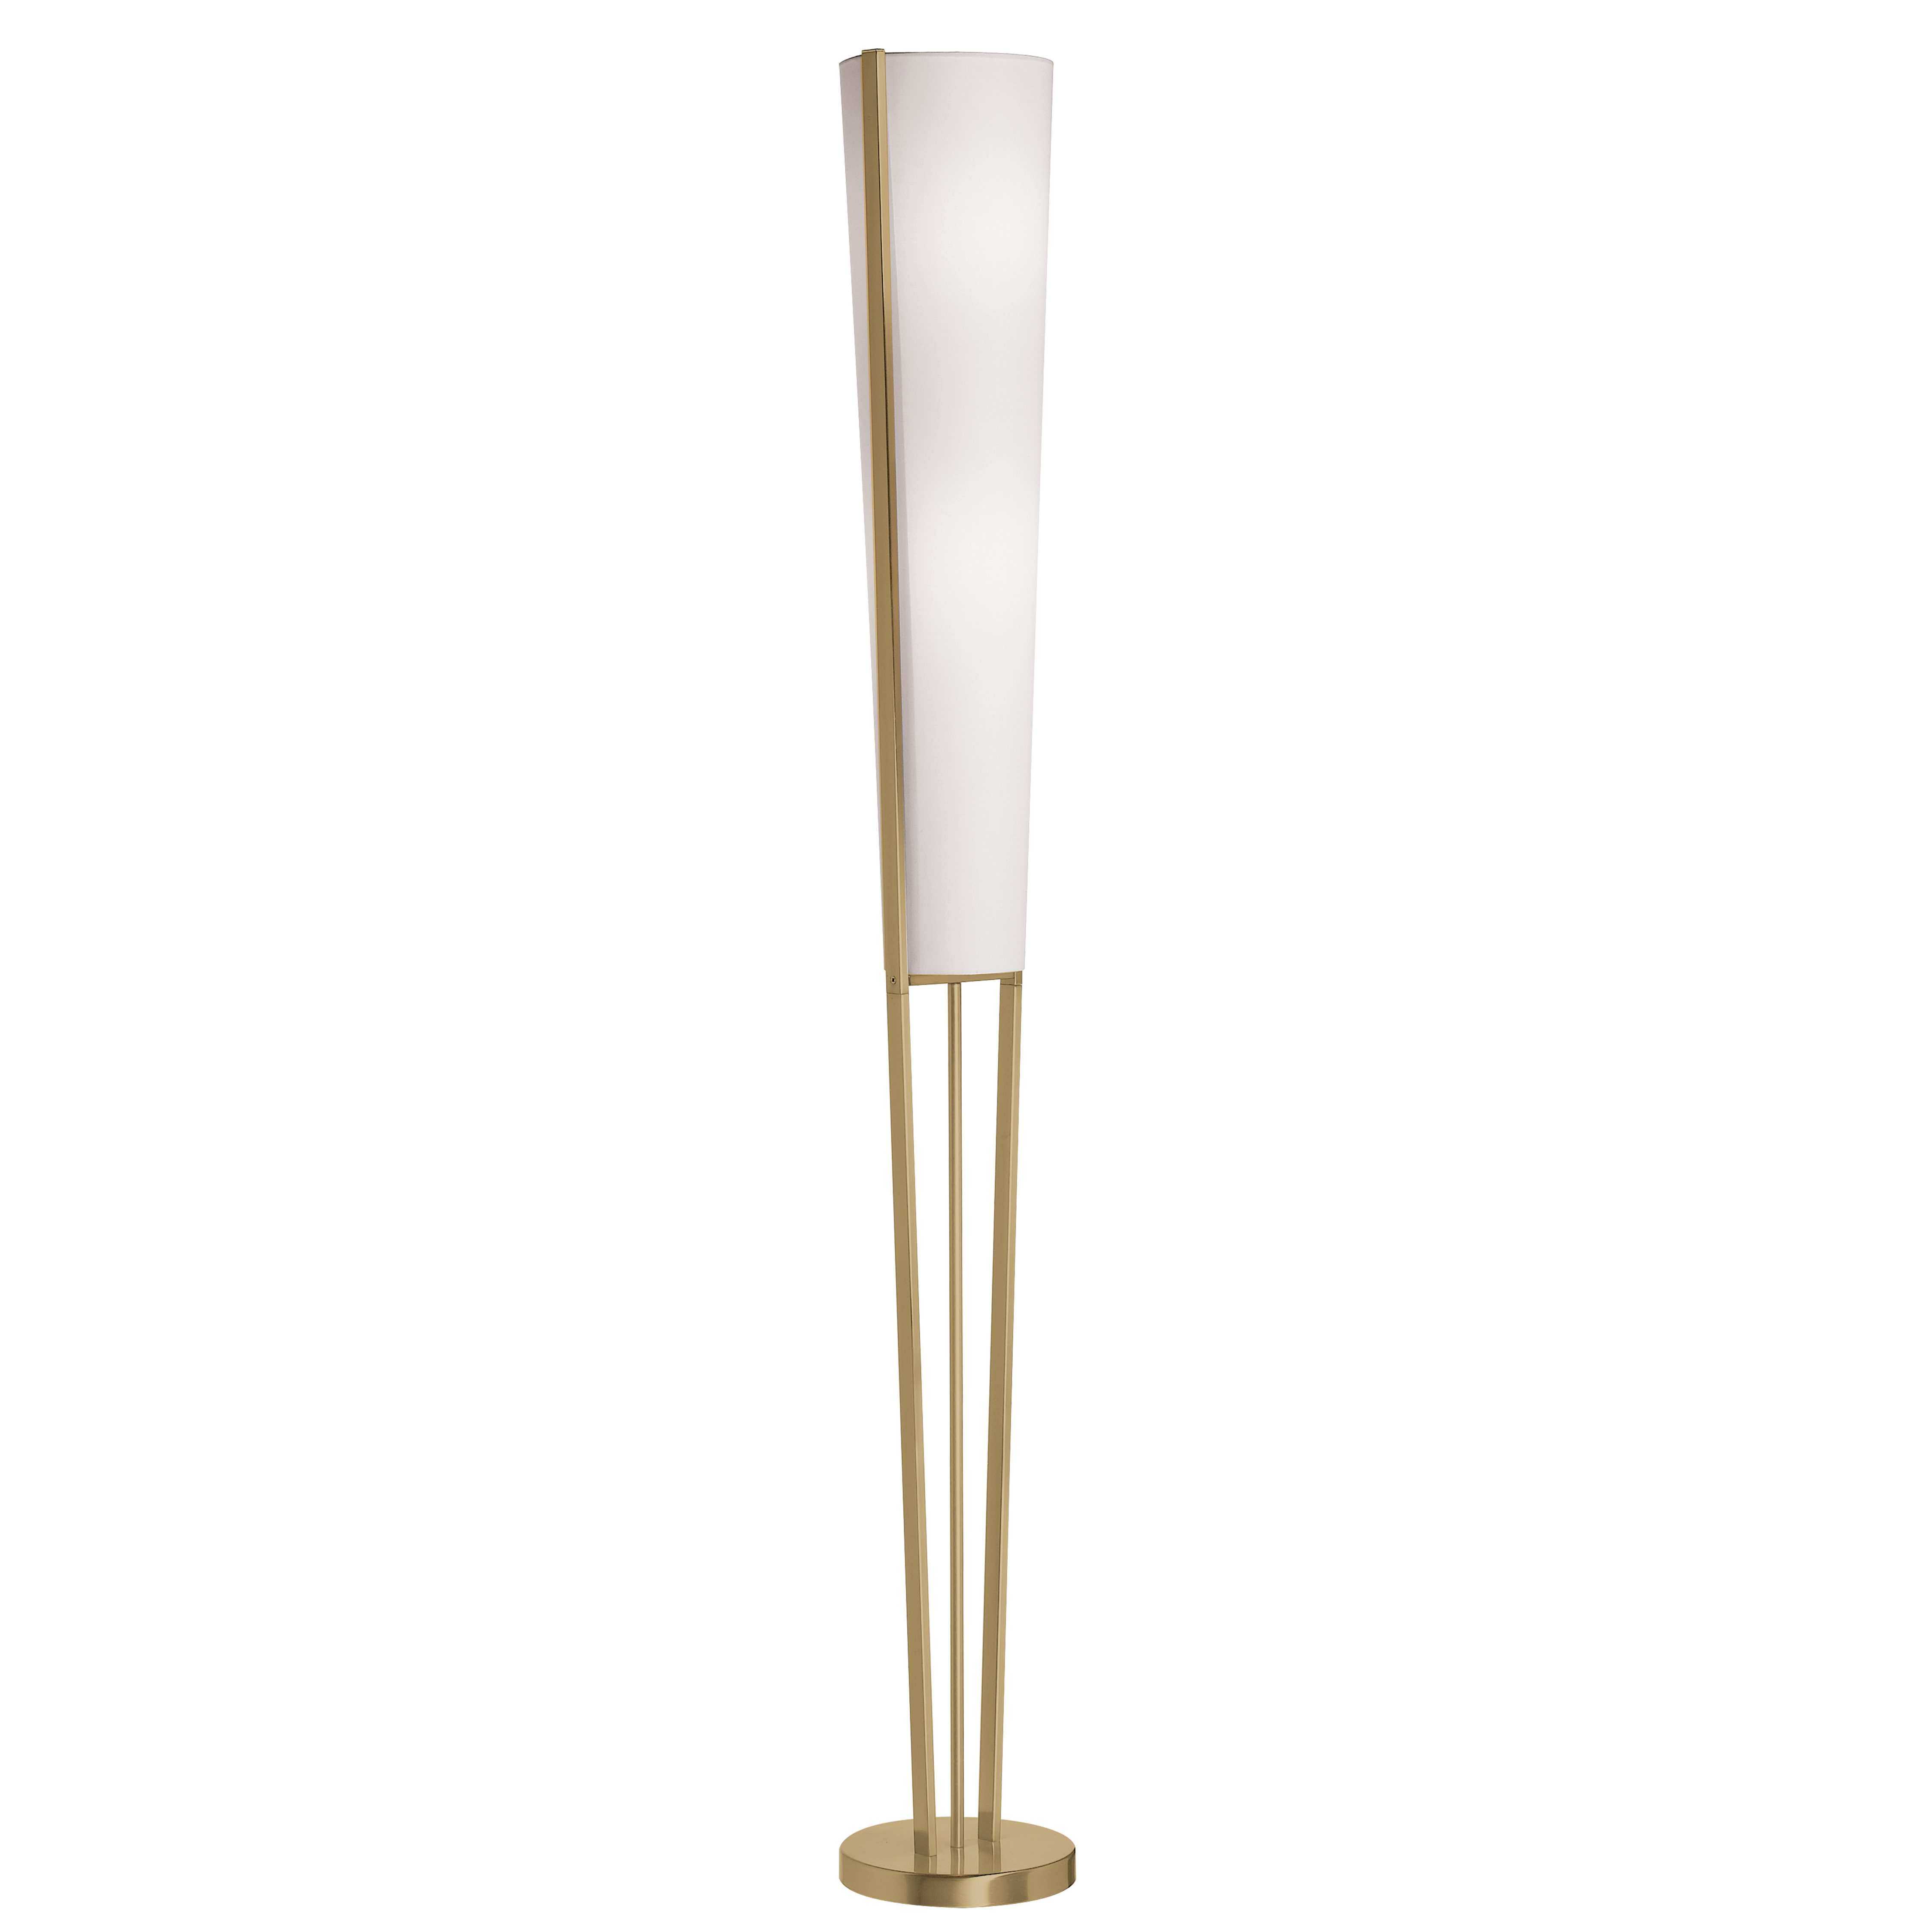 2LT Incand Floor Lamp, AGB w/ WH Shade